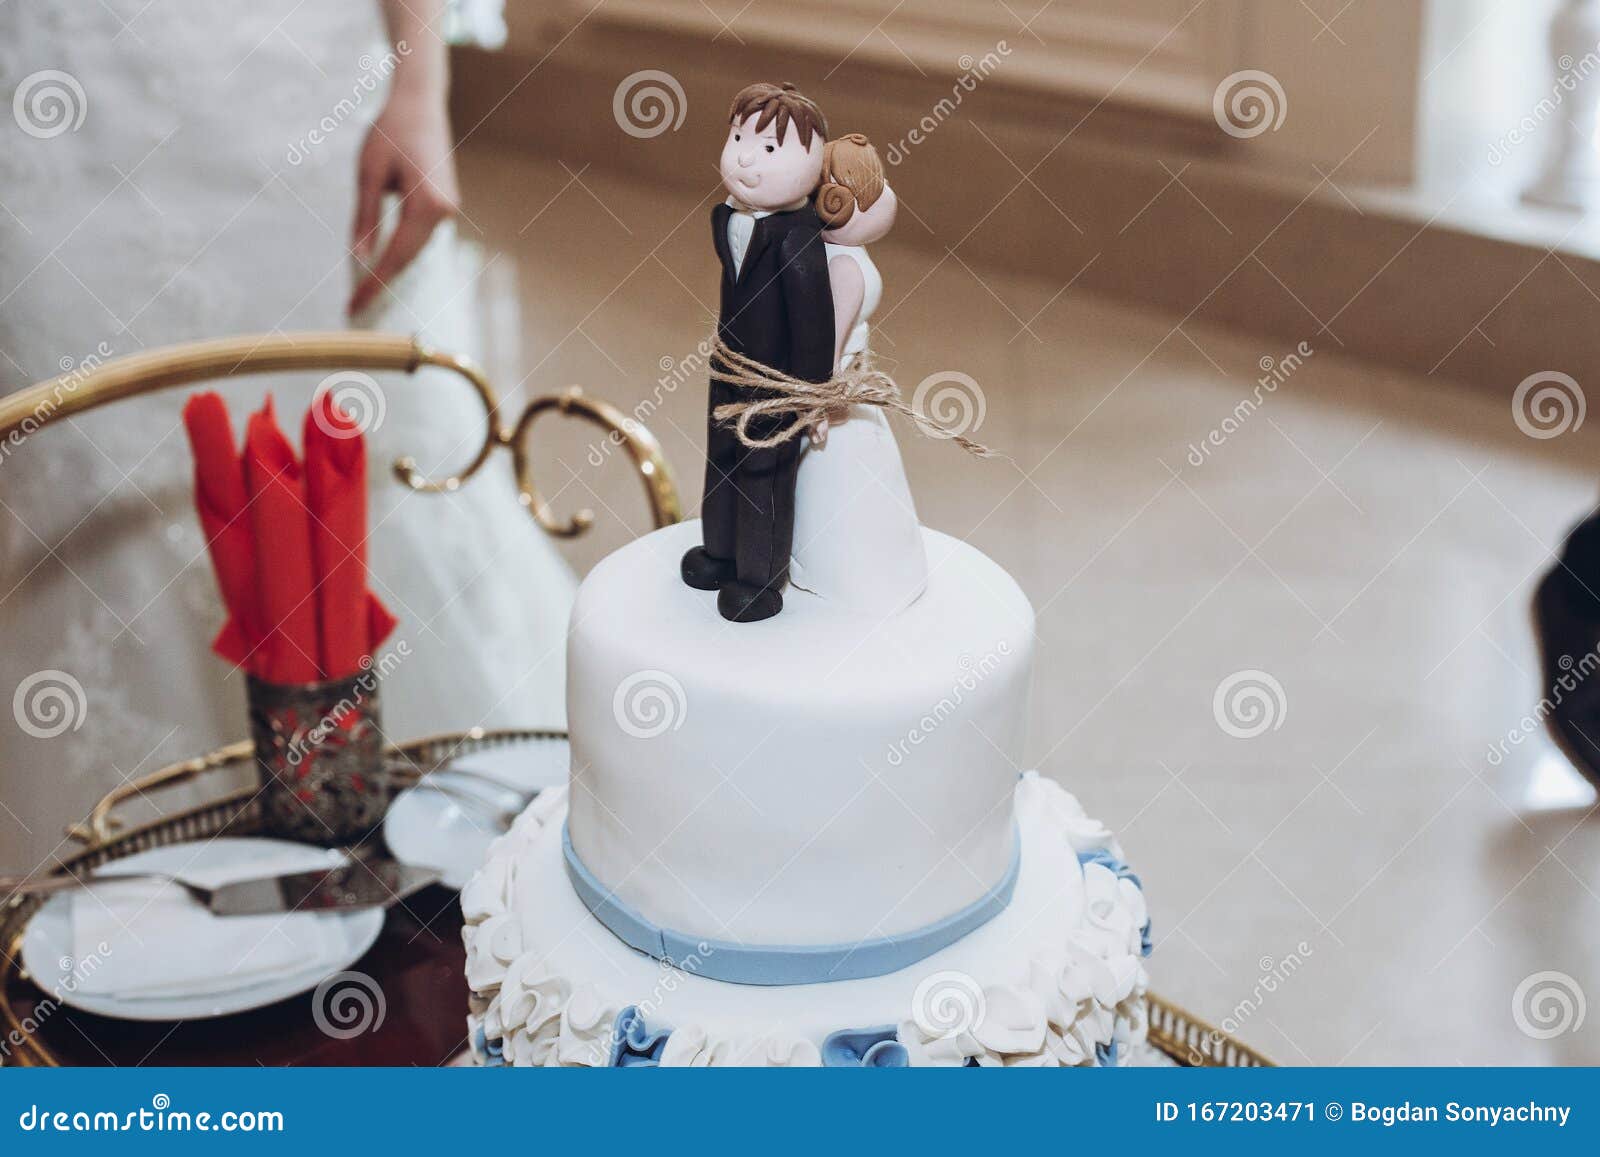 Funny Wedding Cake Topper, Figurines of Bride and Groom Tied Together with  a Rope, Fun Wedding Moment with Delicious White Cake Stock Image - Image of  groom, wedding: 167203471